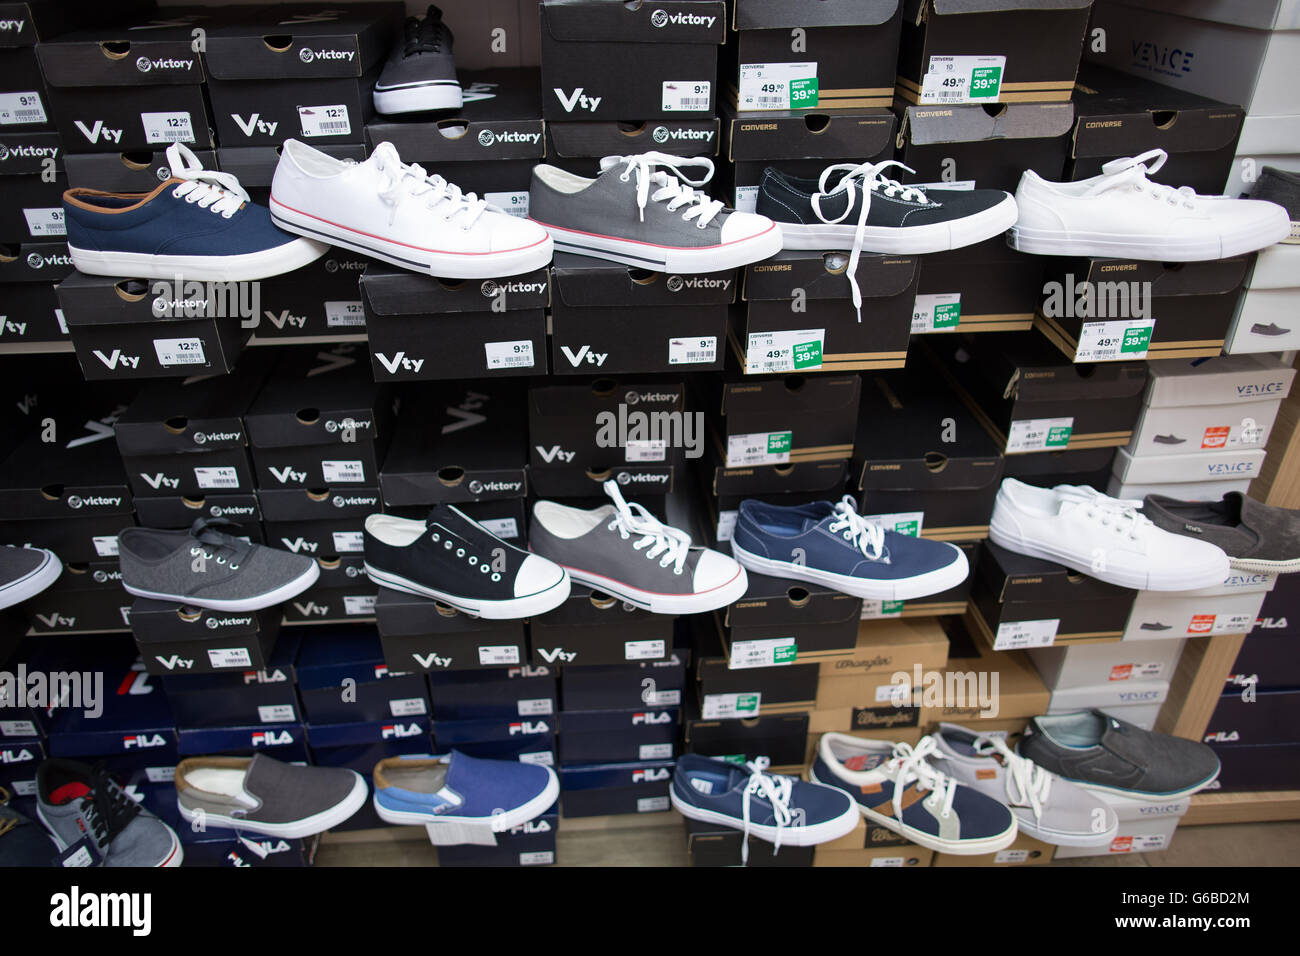 Duesseldorf, Germany. 24th 2016. Shoes on sale at a Deichmann store in Duesseldorf, 24 June 2016. PHOTO: MAJA HITIJ/dpa/Alamy Live News Stock Photo - Alamy